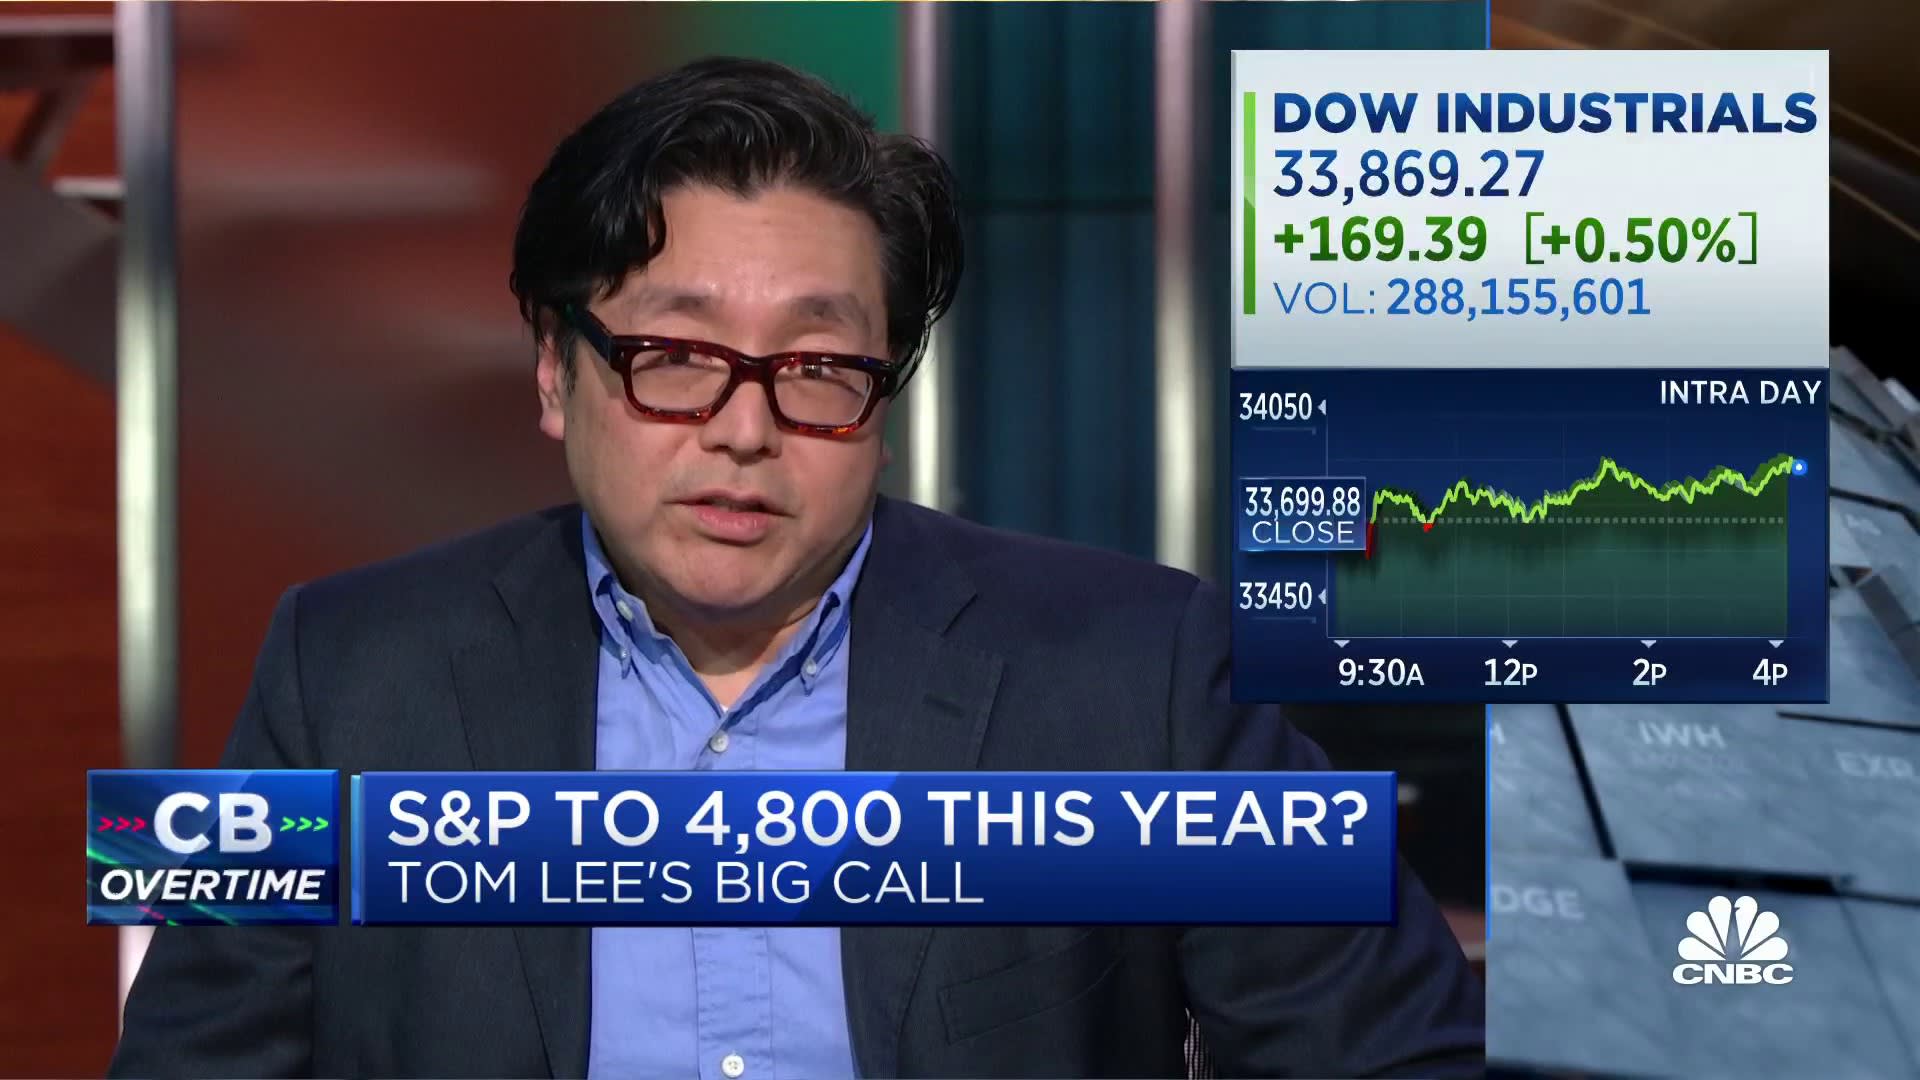 Tom Lee: We now have a predictable Fed, allowing more ease to upside